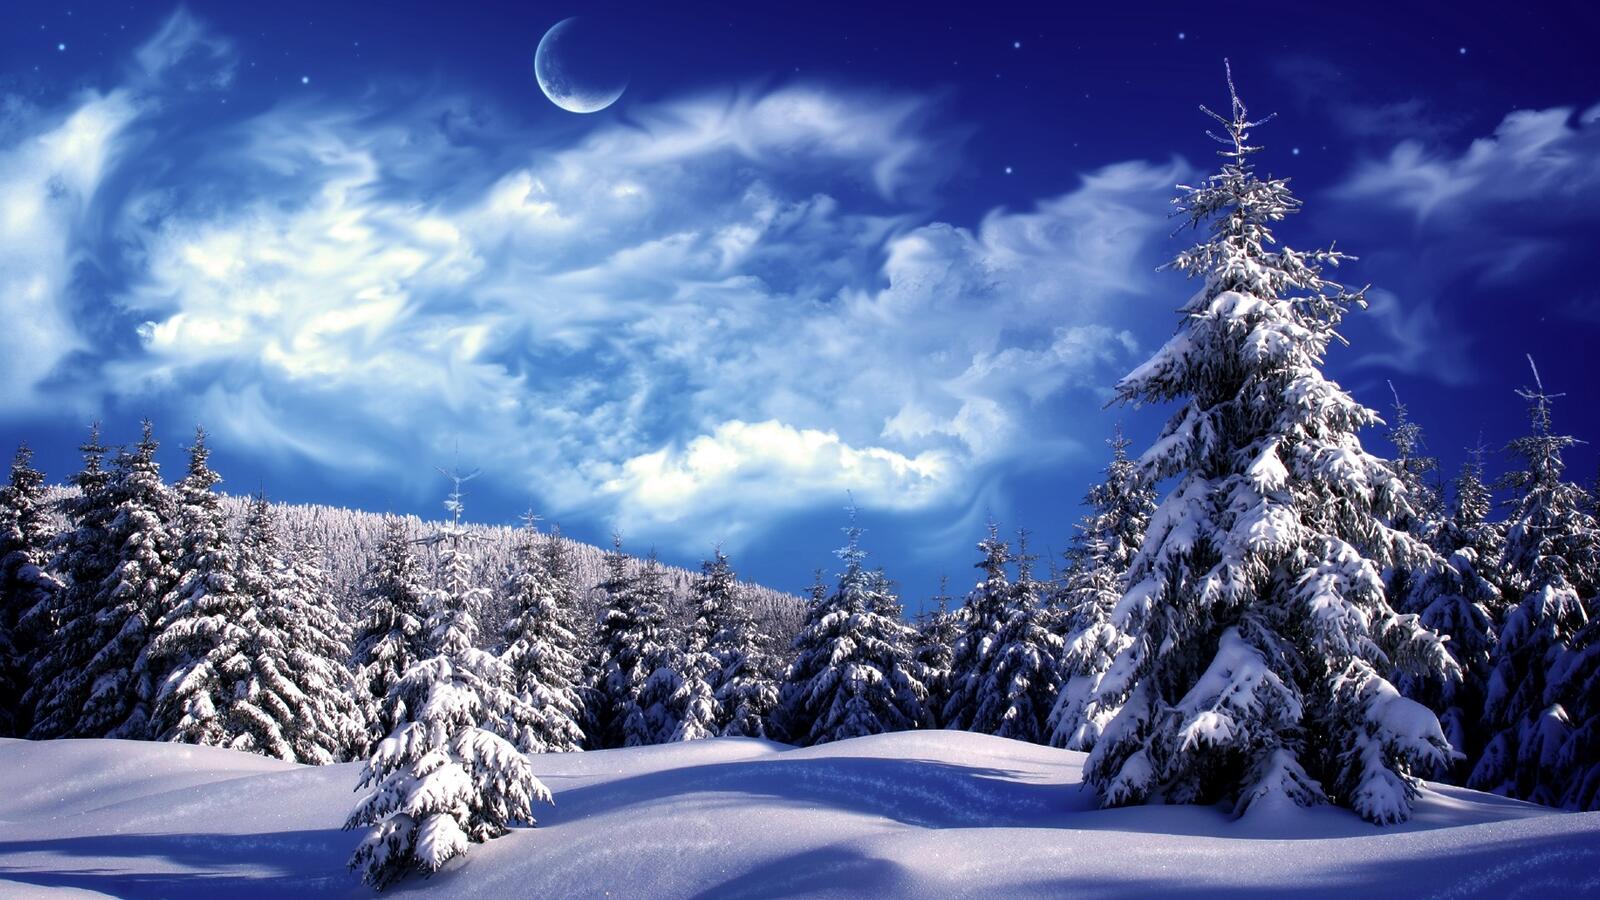 Free photo Spruce winter forest wrapped in drifts, and in the sky a beautiful bright moon